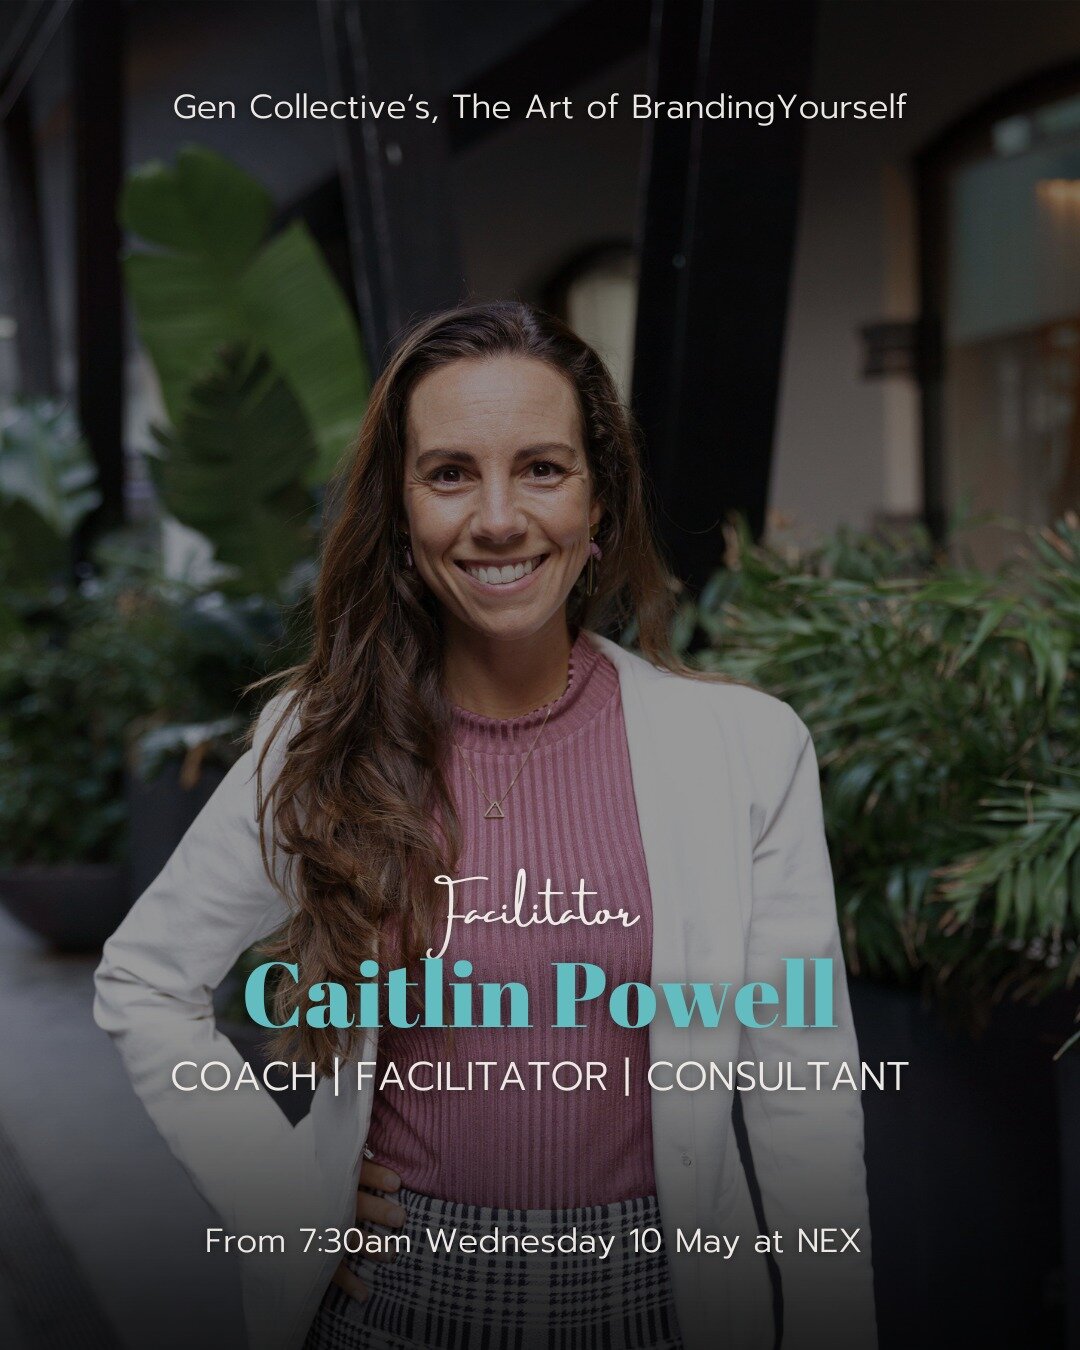 Our committee member Caitlin Powell, will lead the conversation with our panel of speakers next week, bringing her curiosity and perspective to the Art of Branding Yourself 👏

Caitlin is a Leadership Coach, Facilitator and People &amp; Culture Consu